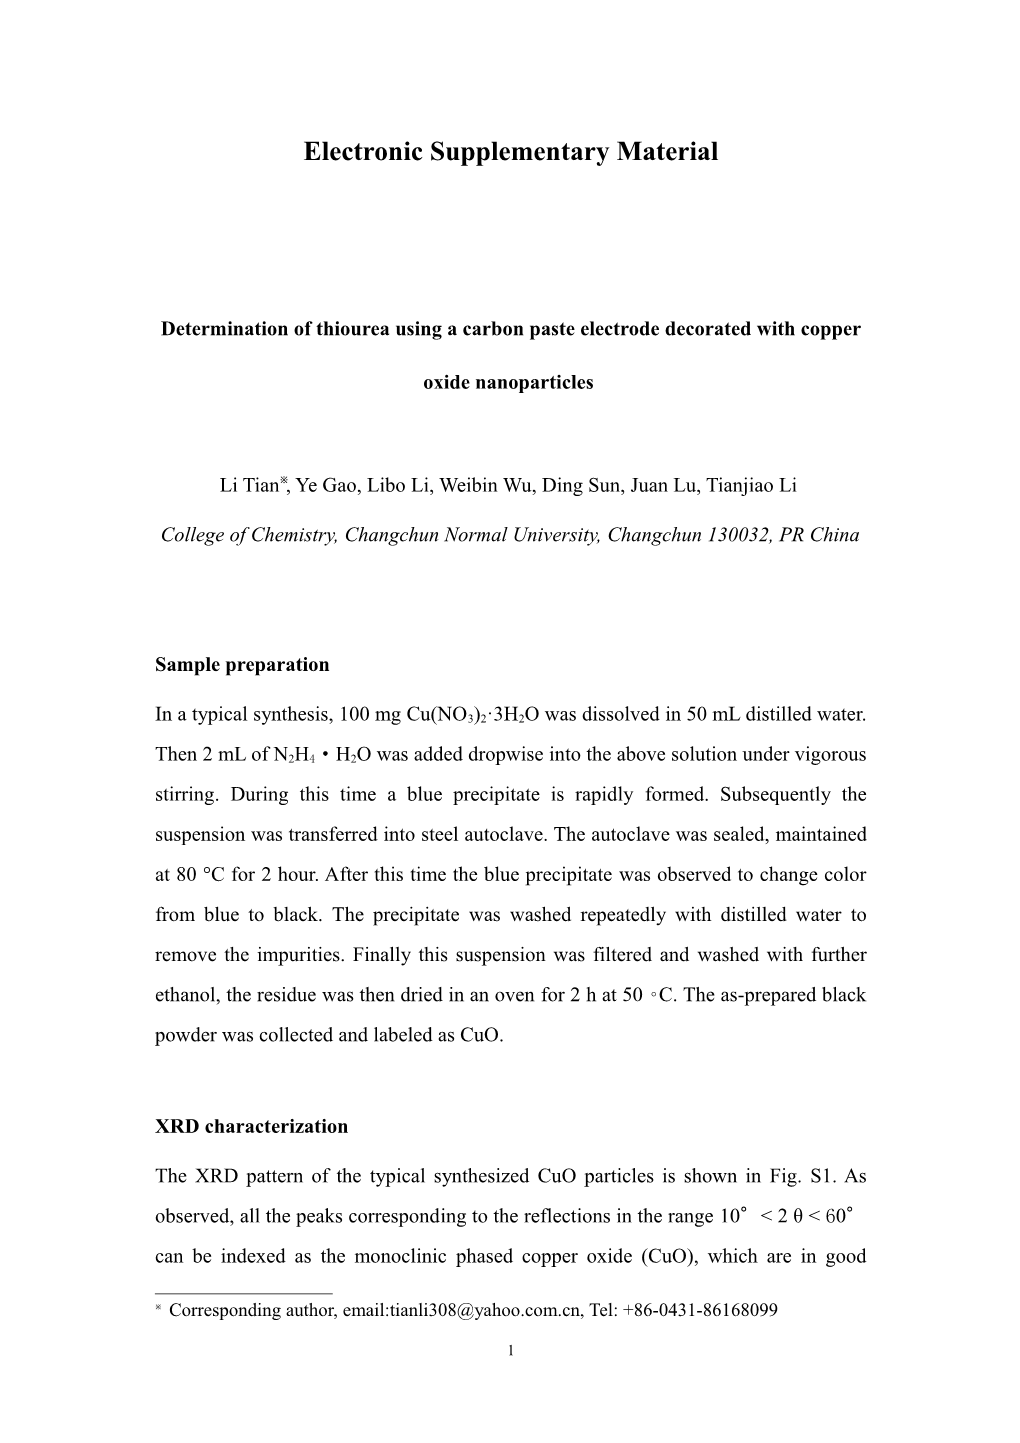 Determination of Thiourea Using a Carbon Paste Electrode Decorated with Copper Oxide